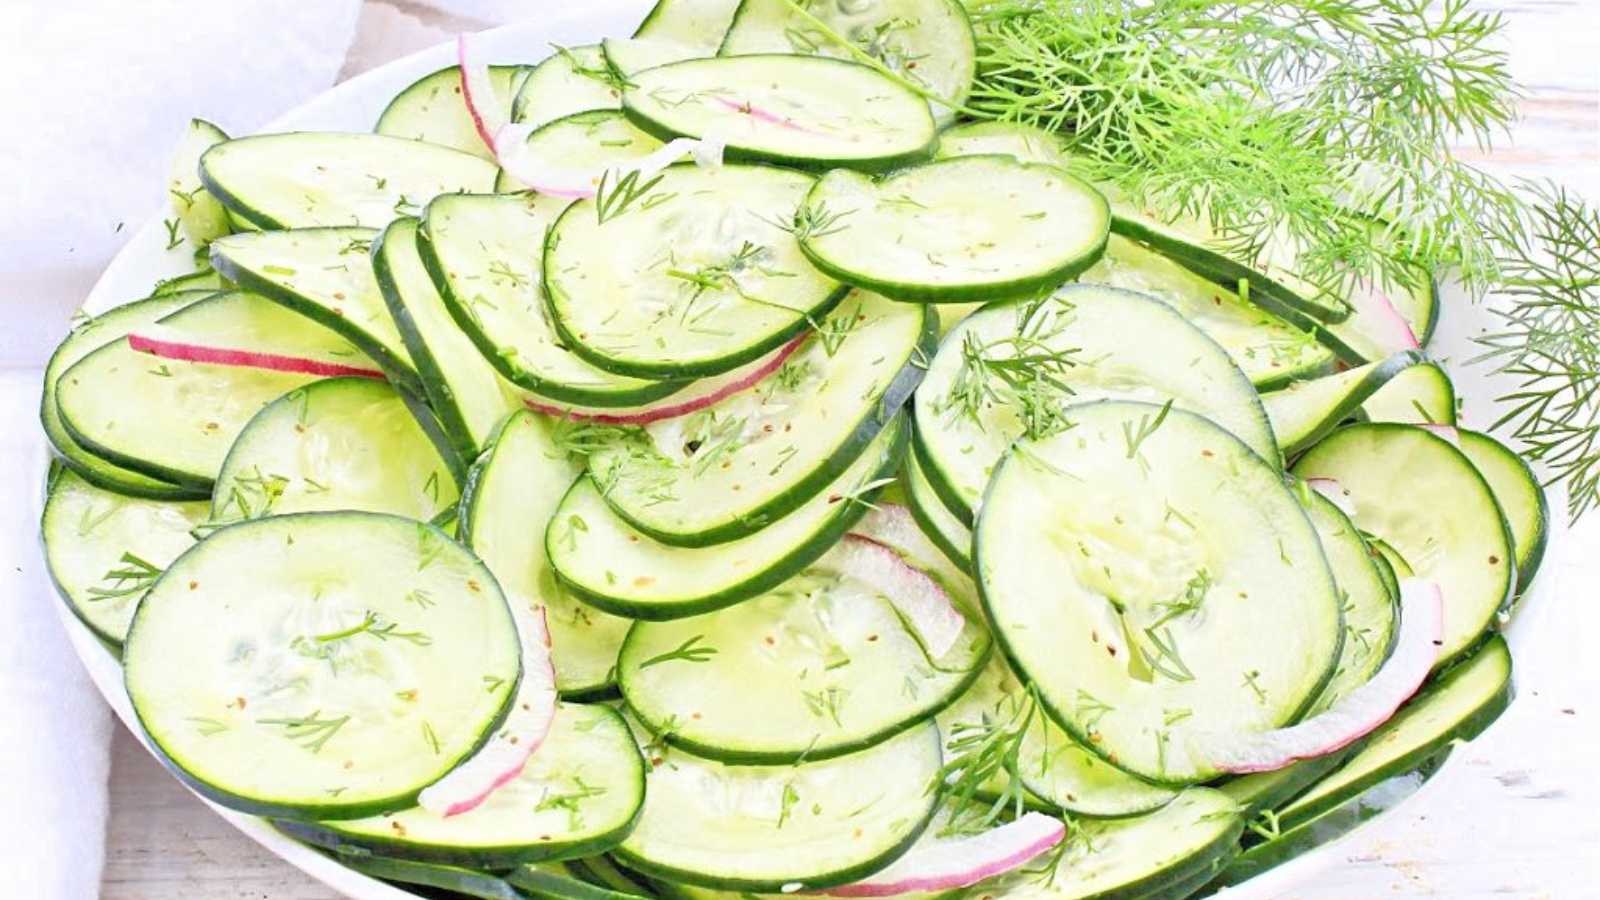 Thinly sliced cucumber in a bowl with red onion and herbs.